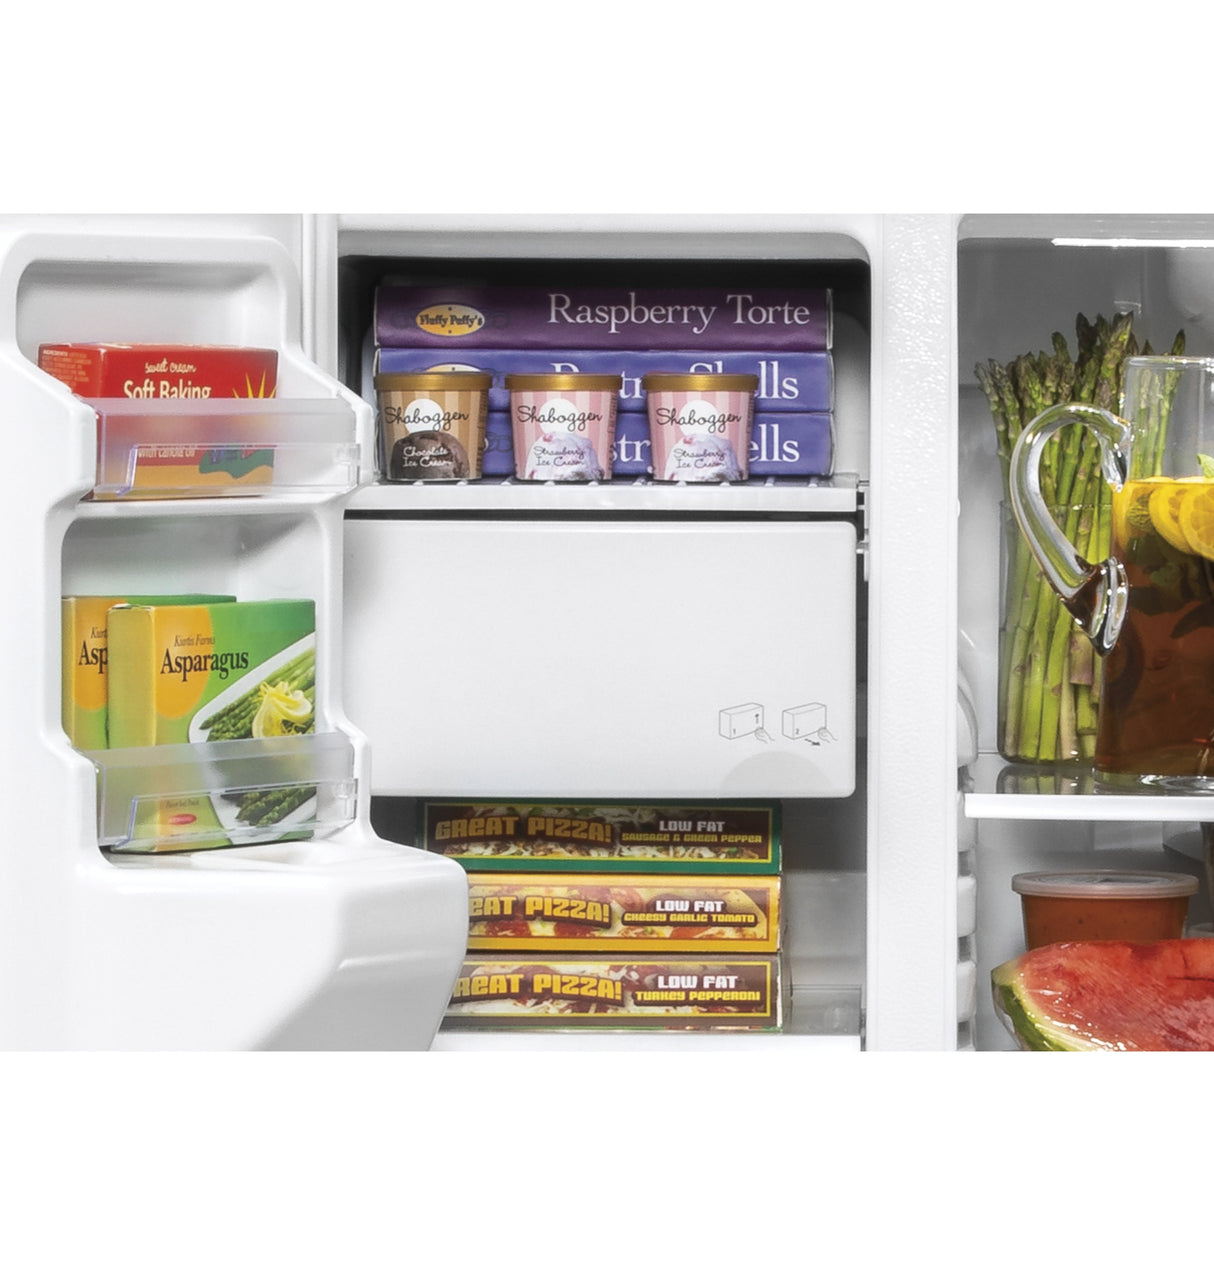 GE(R) 21.8 Cu. Ft. Counter-Depth Side-By-Side Refrigerator - (GZS22IMNES)